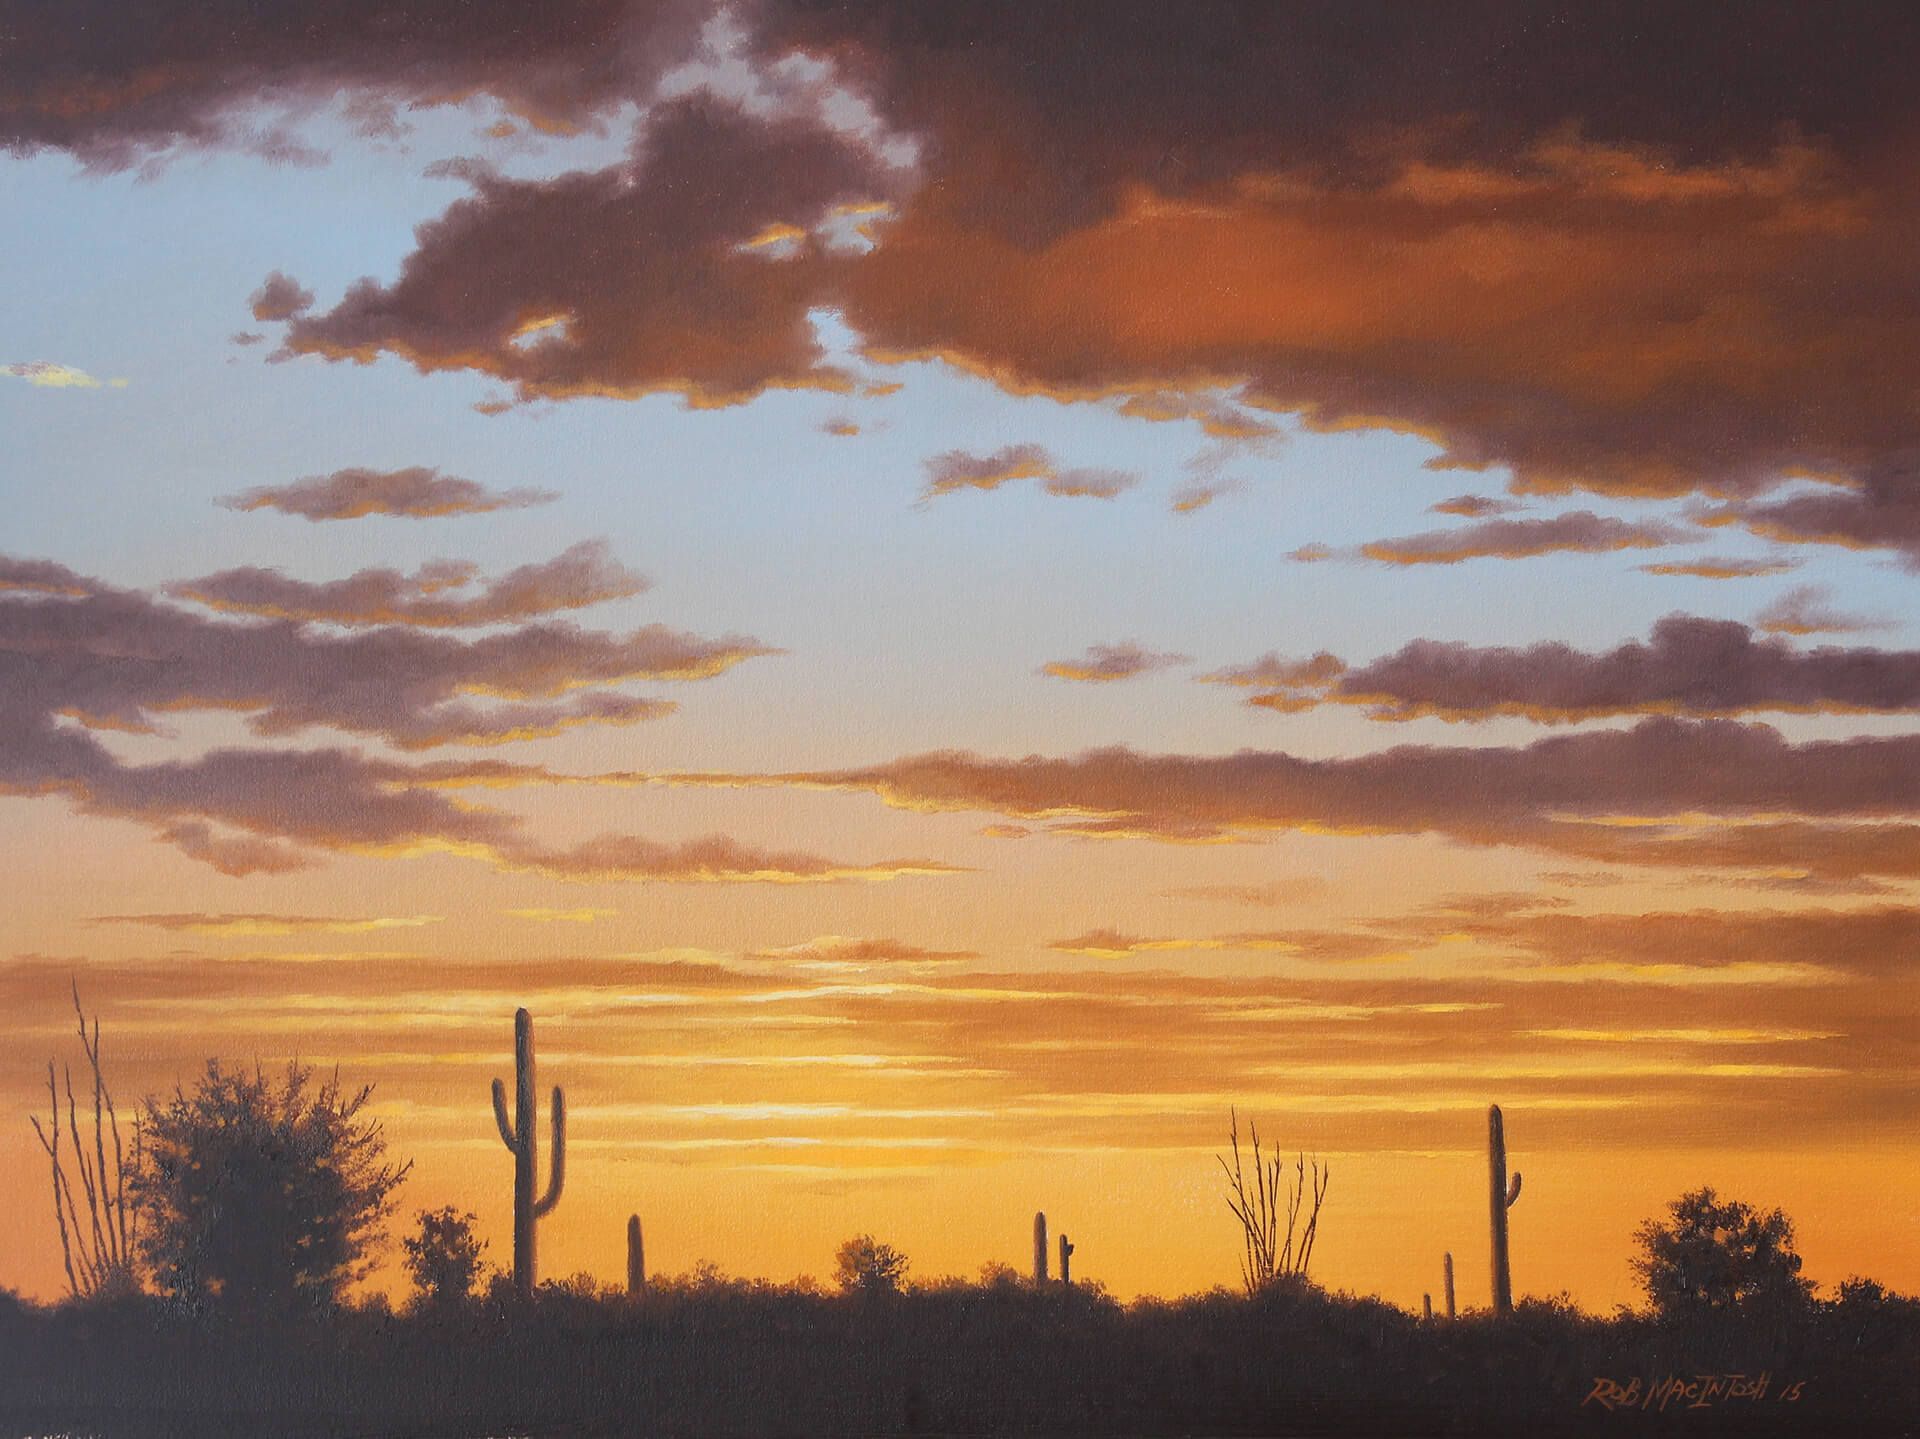 Photorealistic painting of a sunset in Tucson